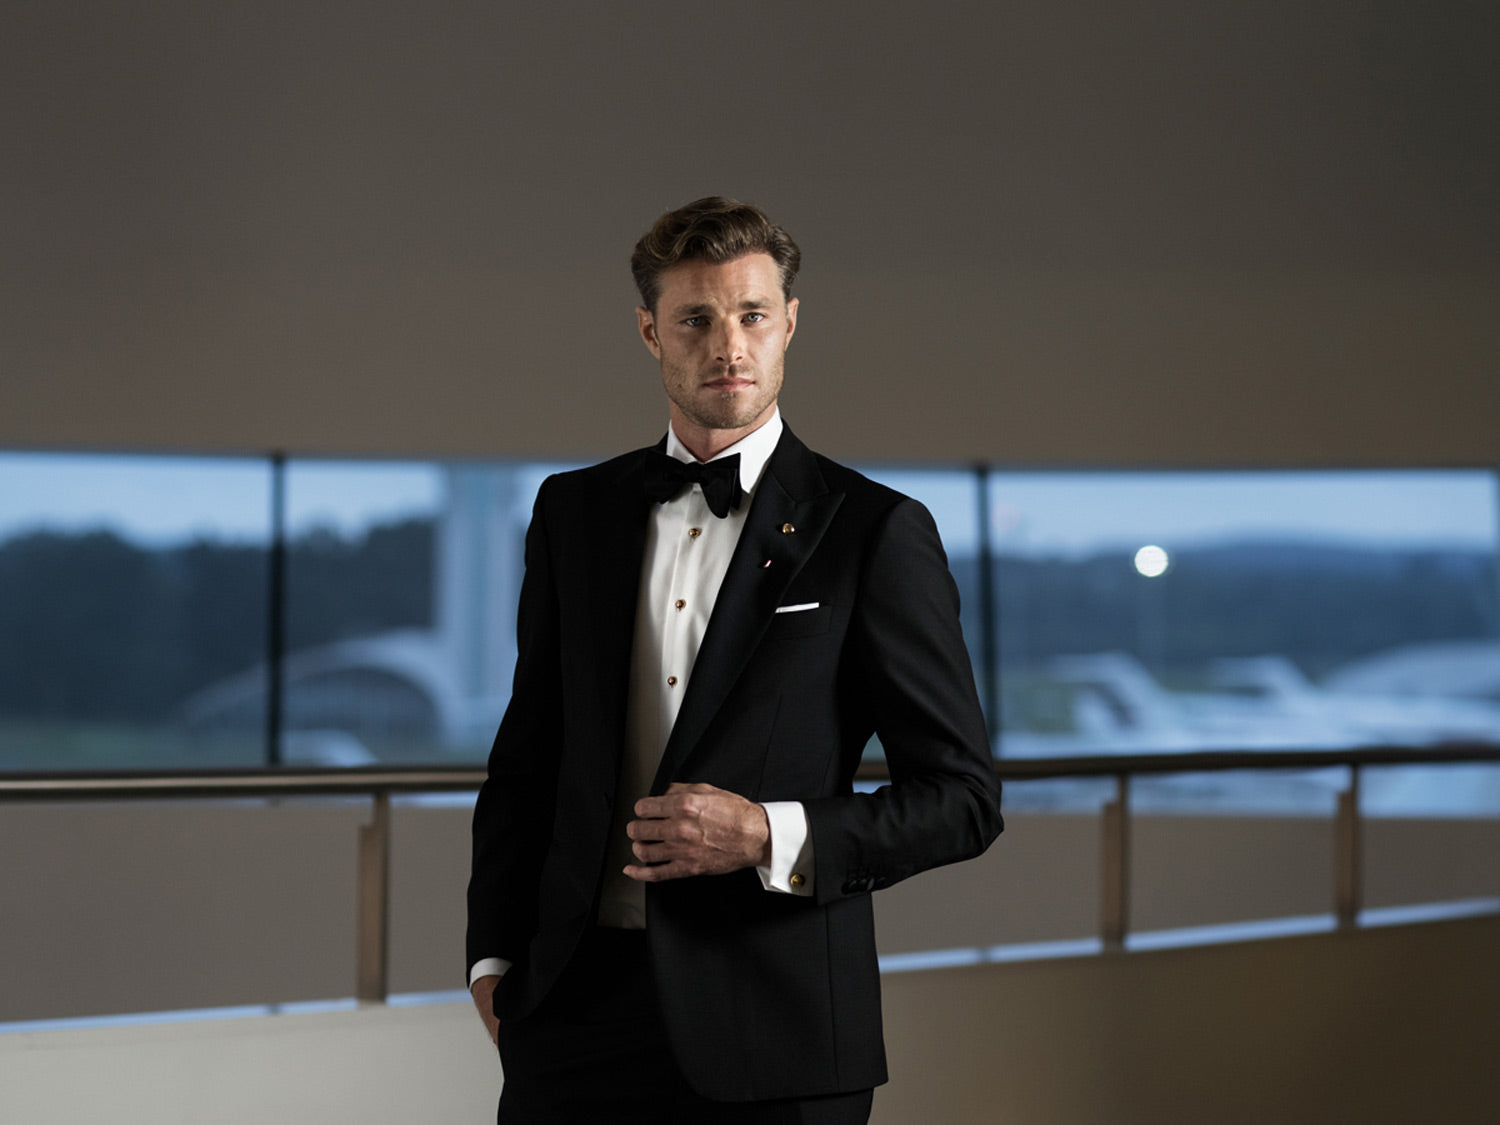 black tie dress code | mens-accessories | Alice-Made-This